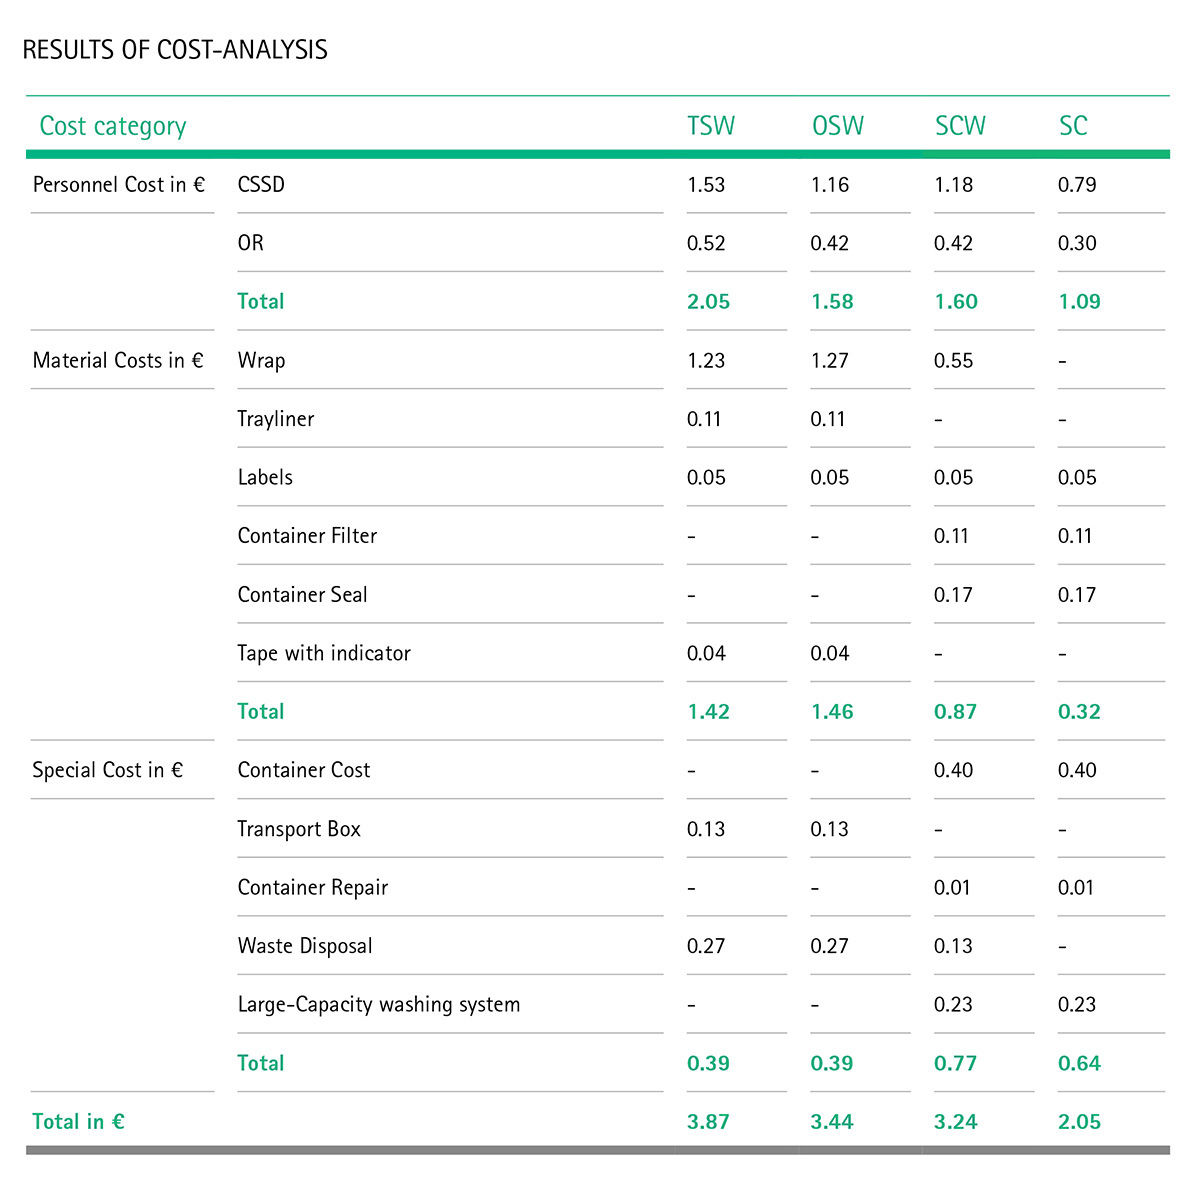 Table: Results of cost-analysis